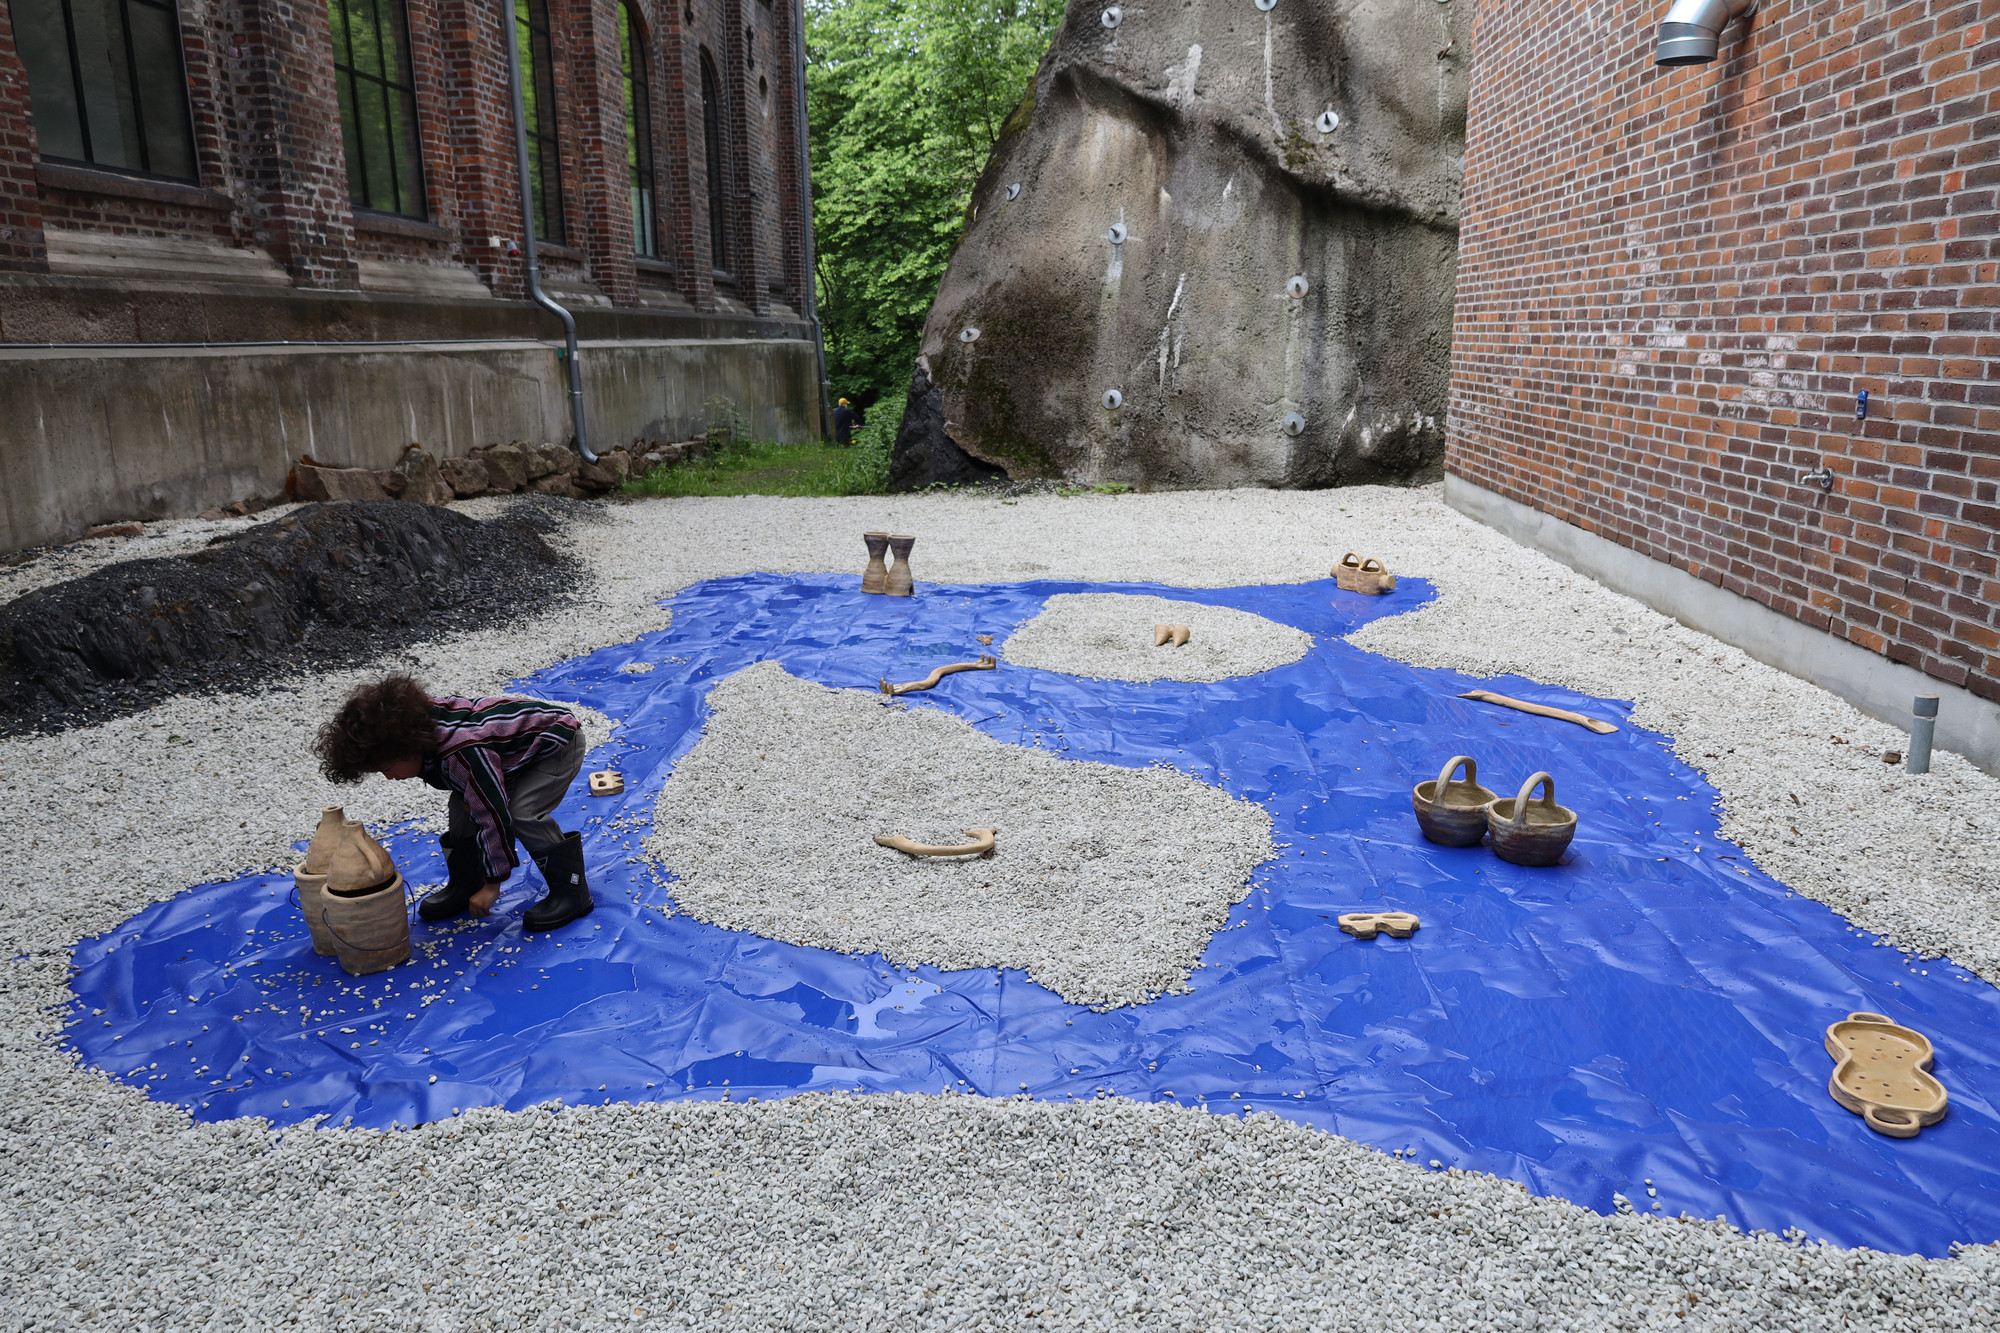 An installation consisting of ceramic objects on the ground which is partially covered by gravel. In the foreground there is a small child looking at one of the sculptures.